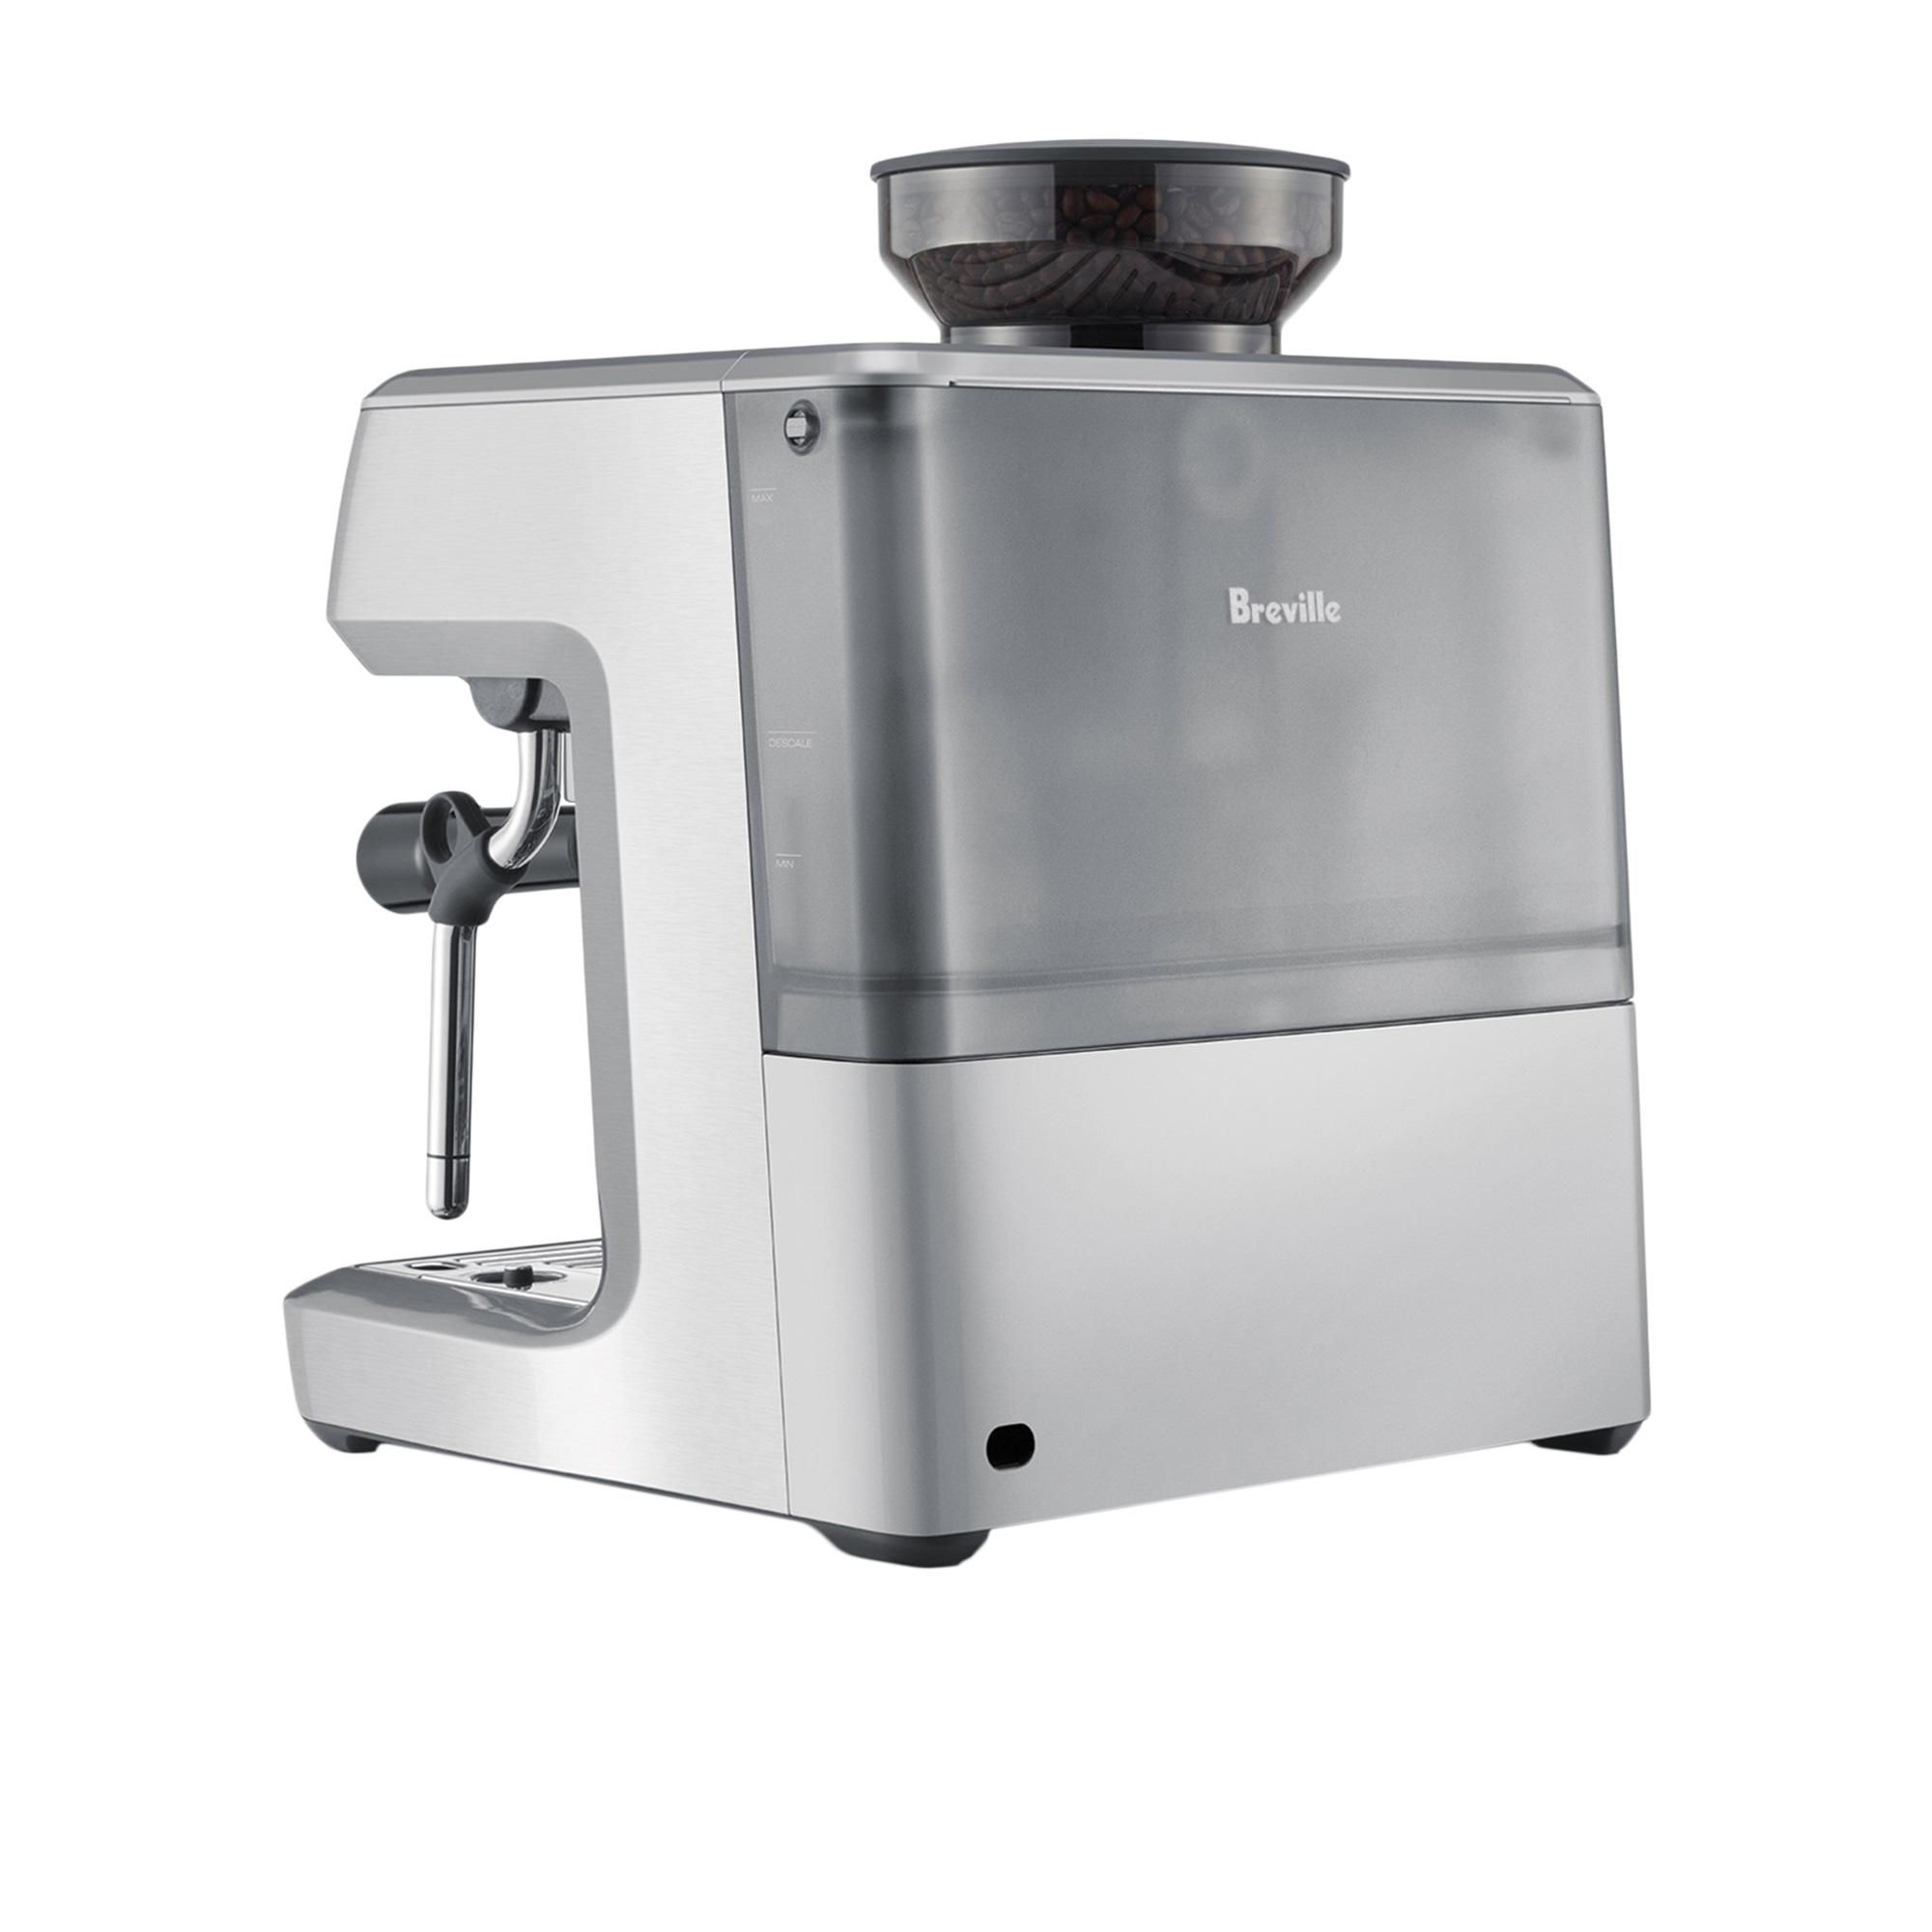 Breville The Barista Express Espresso Machine Brushed Stainless Steel Image 6